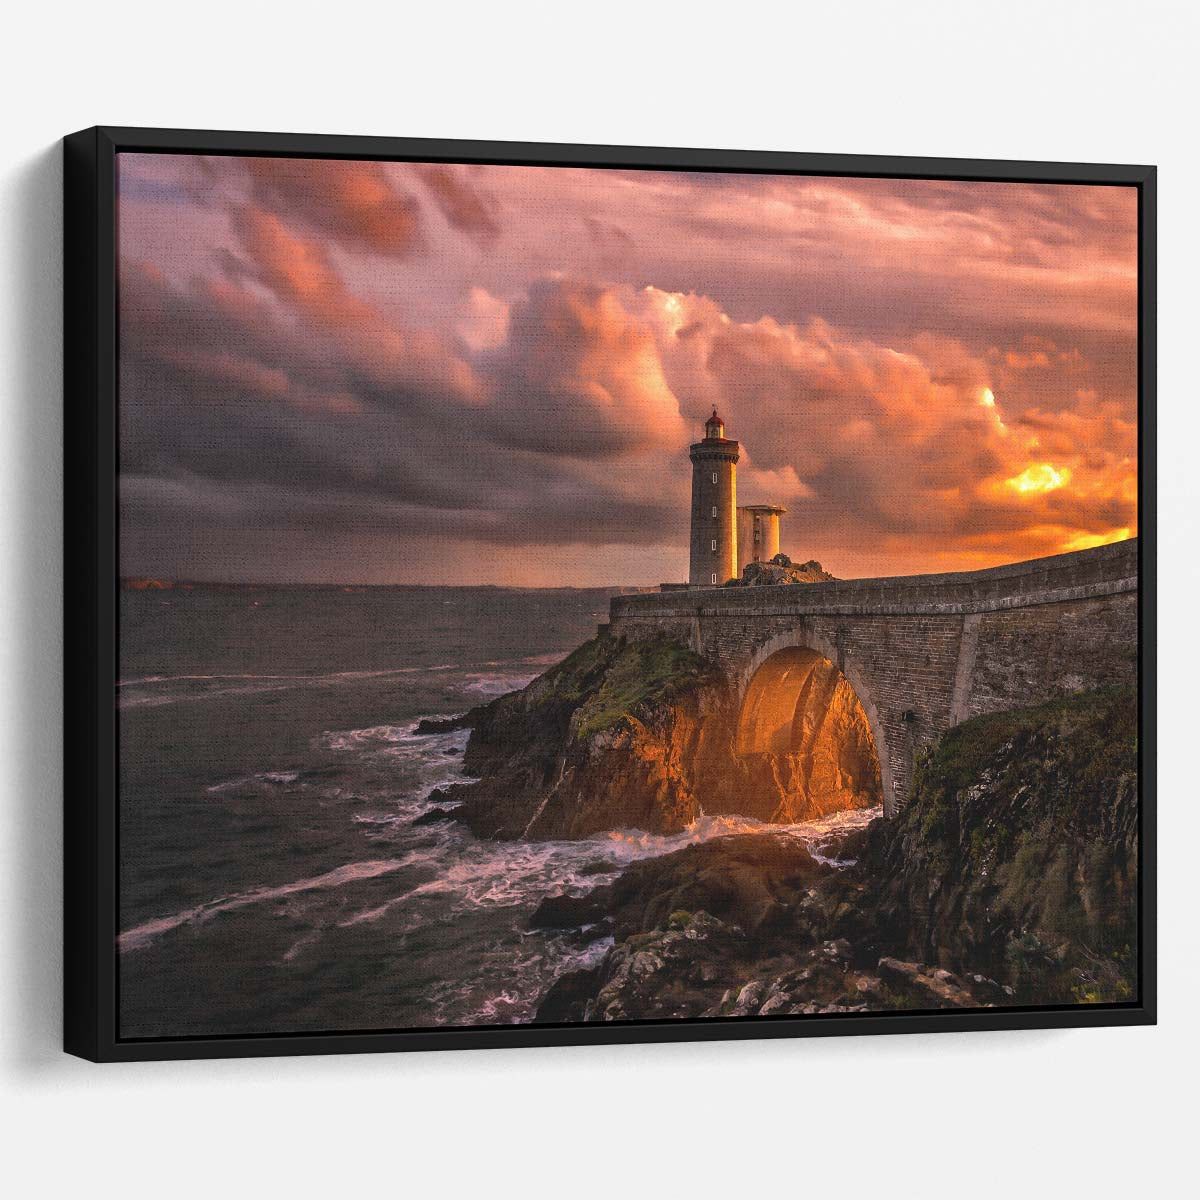 Golden Sunset Lighthouse Seascape Wall Art by Luxuriance Designs. Made in USA.